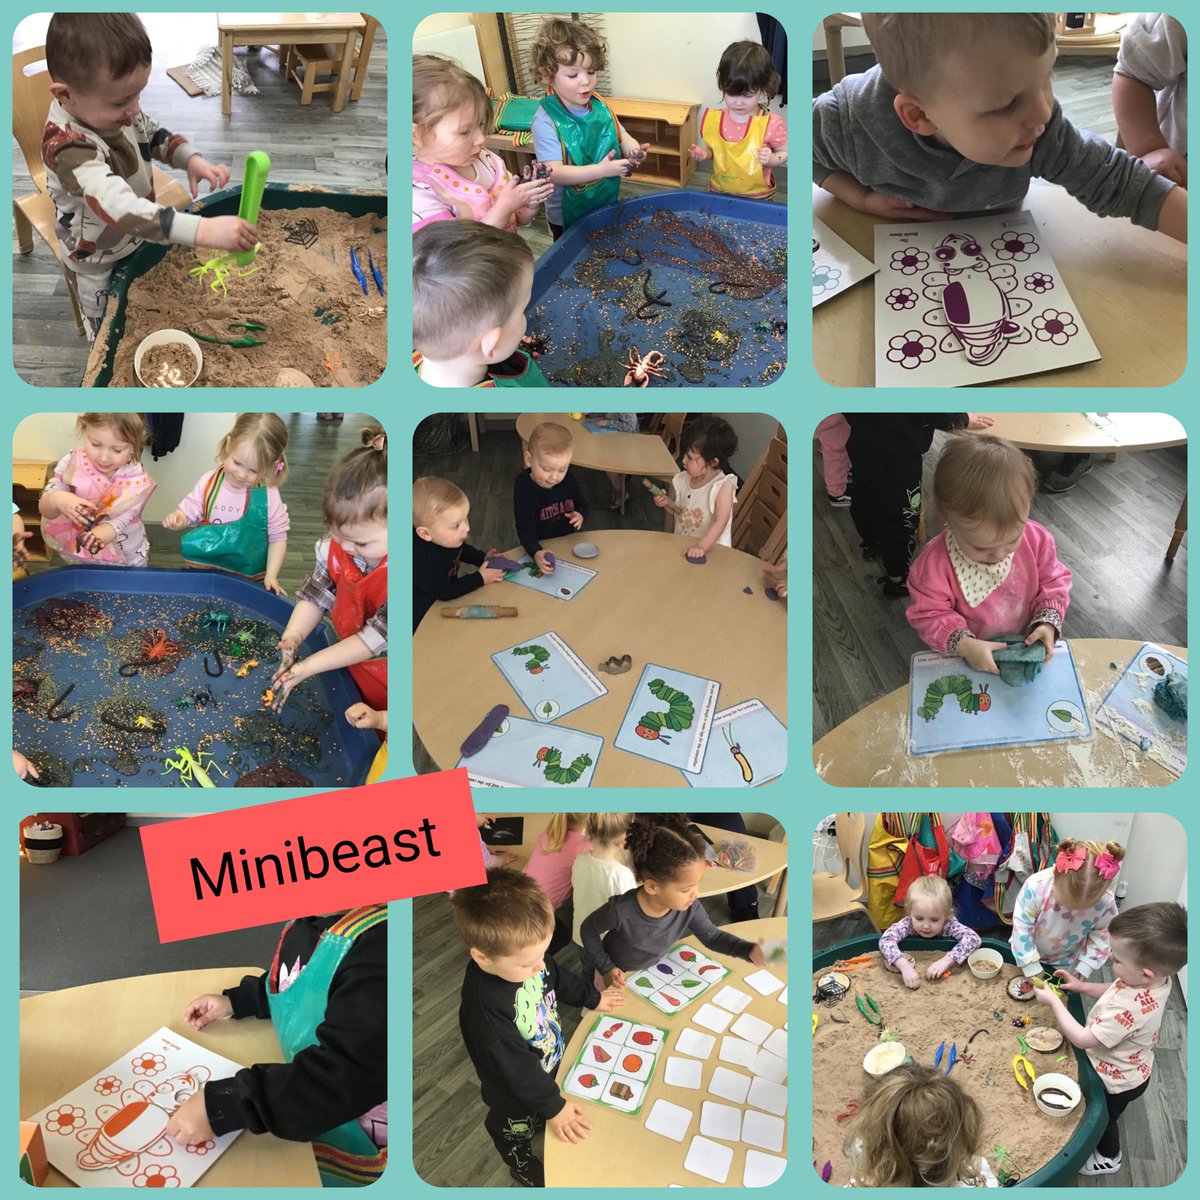 We have been creating different bugs using play dough, taking turns with our friends as we played different minibeast games, explored a range of minibeast sensory trays, using tweezers to pick up bugs, and talked about what they looked like 🐜🐞🕷🐛 #PlayLearnThrive @QUESTtrust